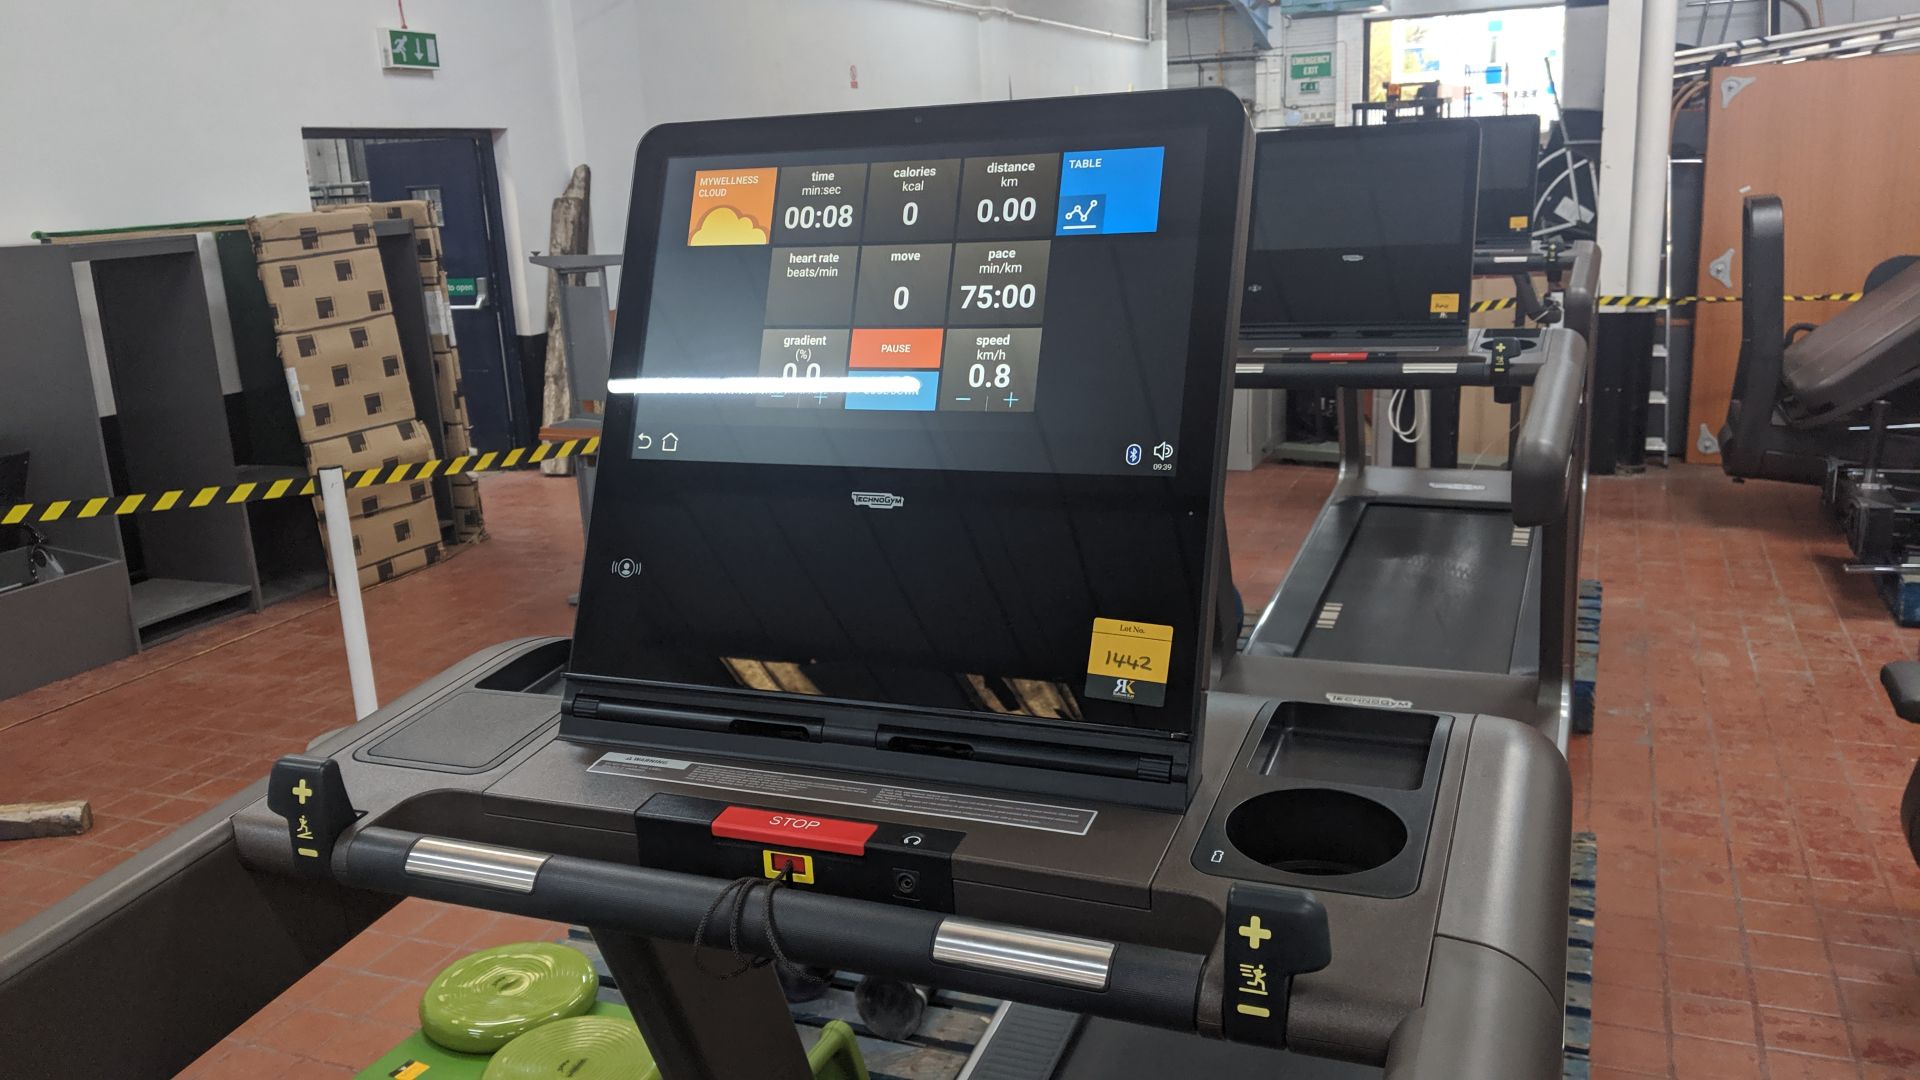 Technogym Artis treadmill Purchased new in 2016 - refurbished/recommissioned by Technogym - please - Image 12 of 13